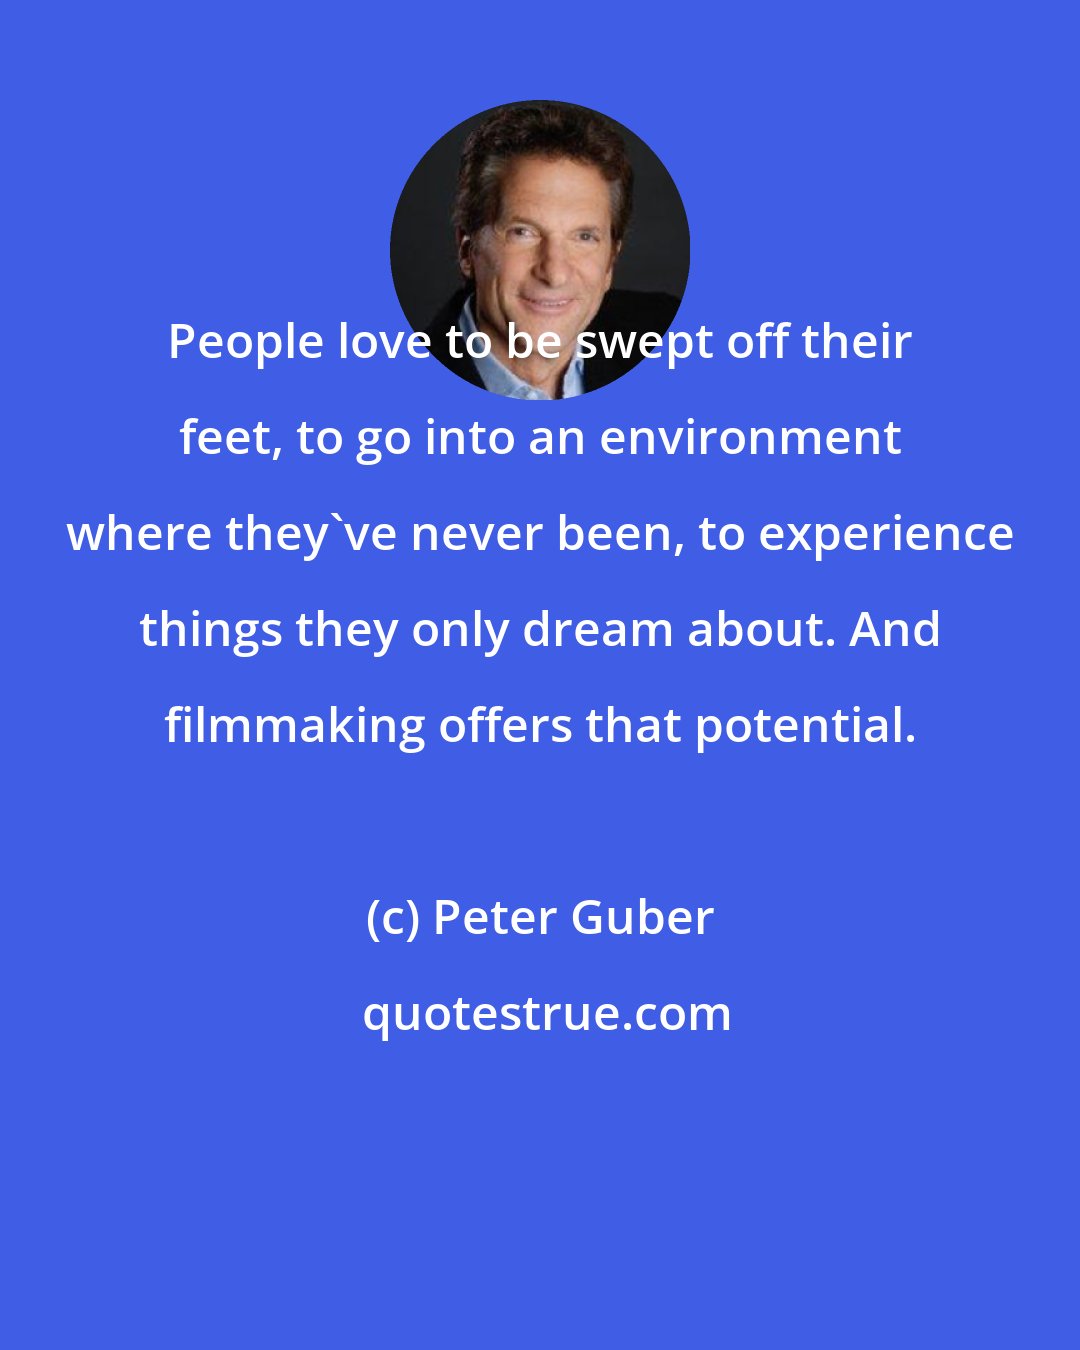 Peter Guber: People love to be swept off their feet, to go into an environment where they've never been, to experience things they only dream about. And filmmaking offers that potential.